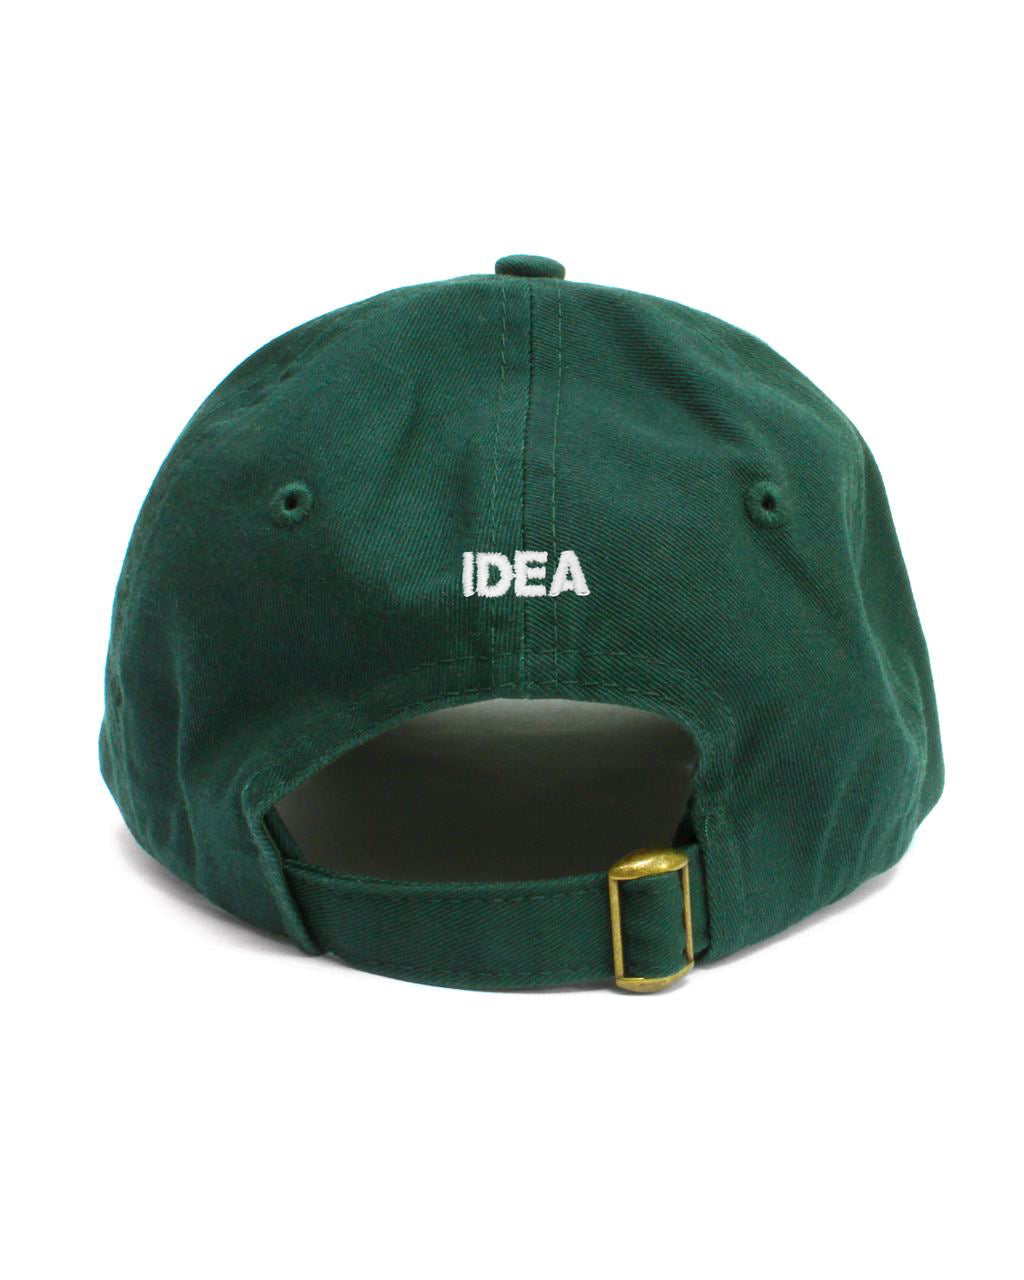 Cap - Out For Lunch - dark green